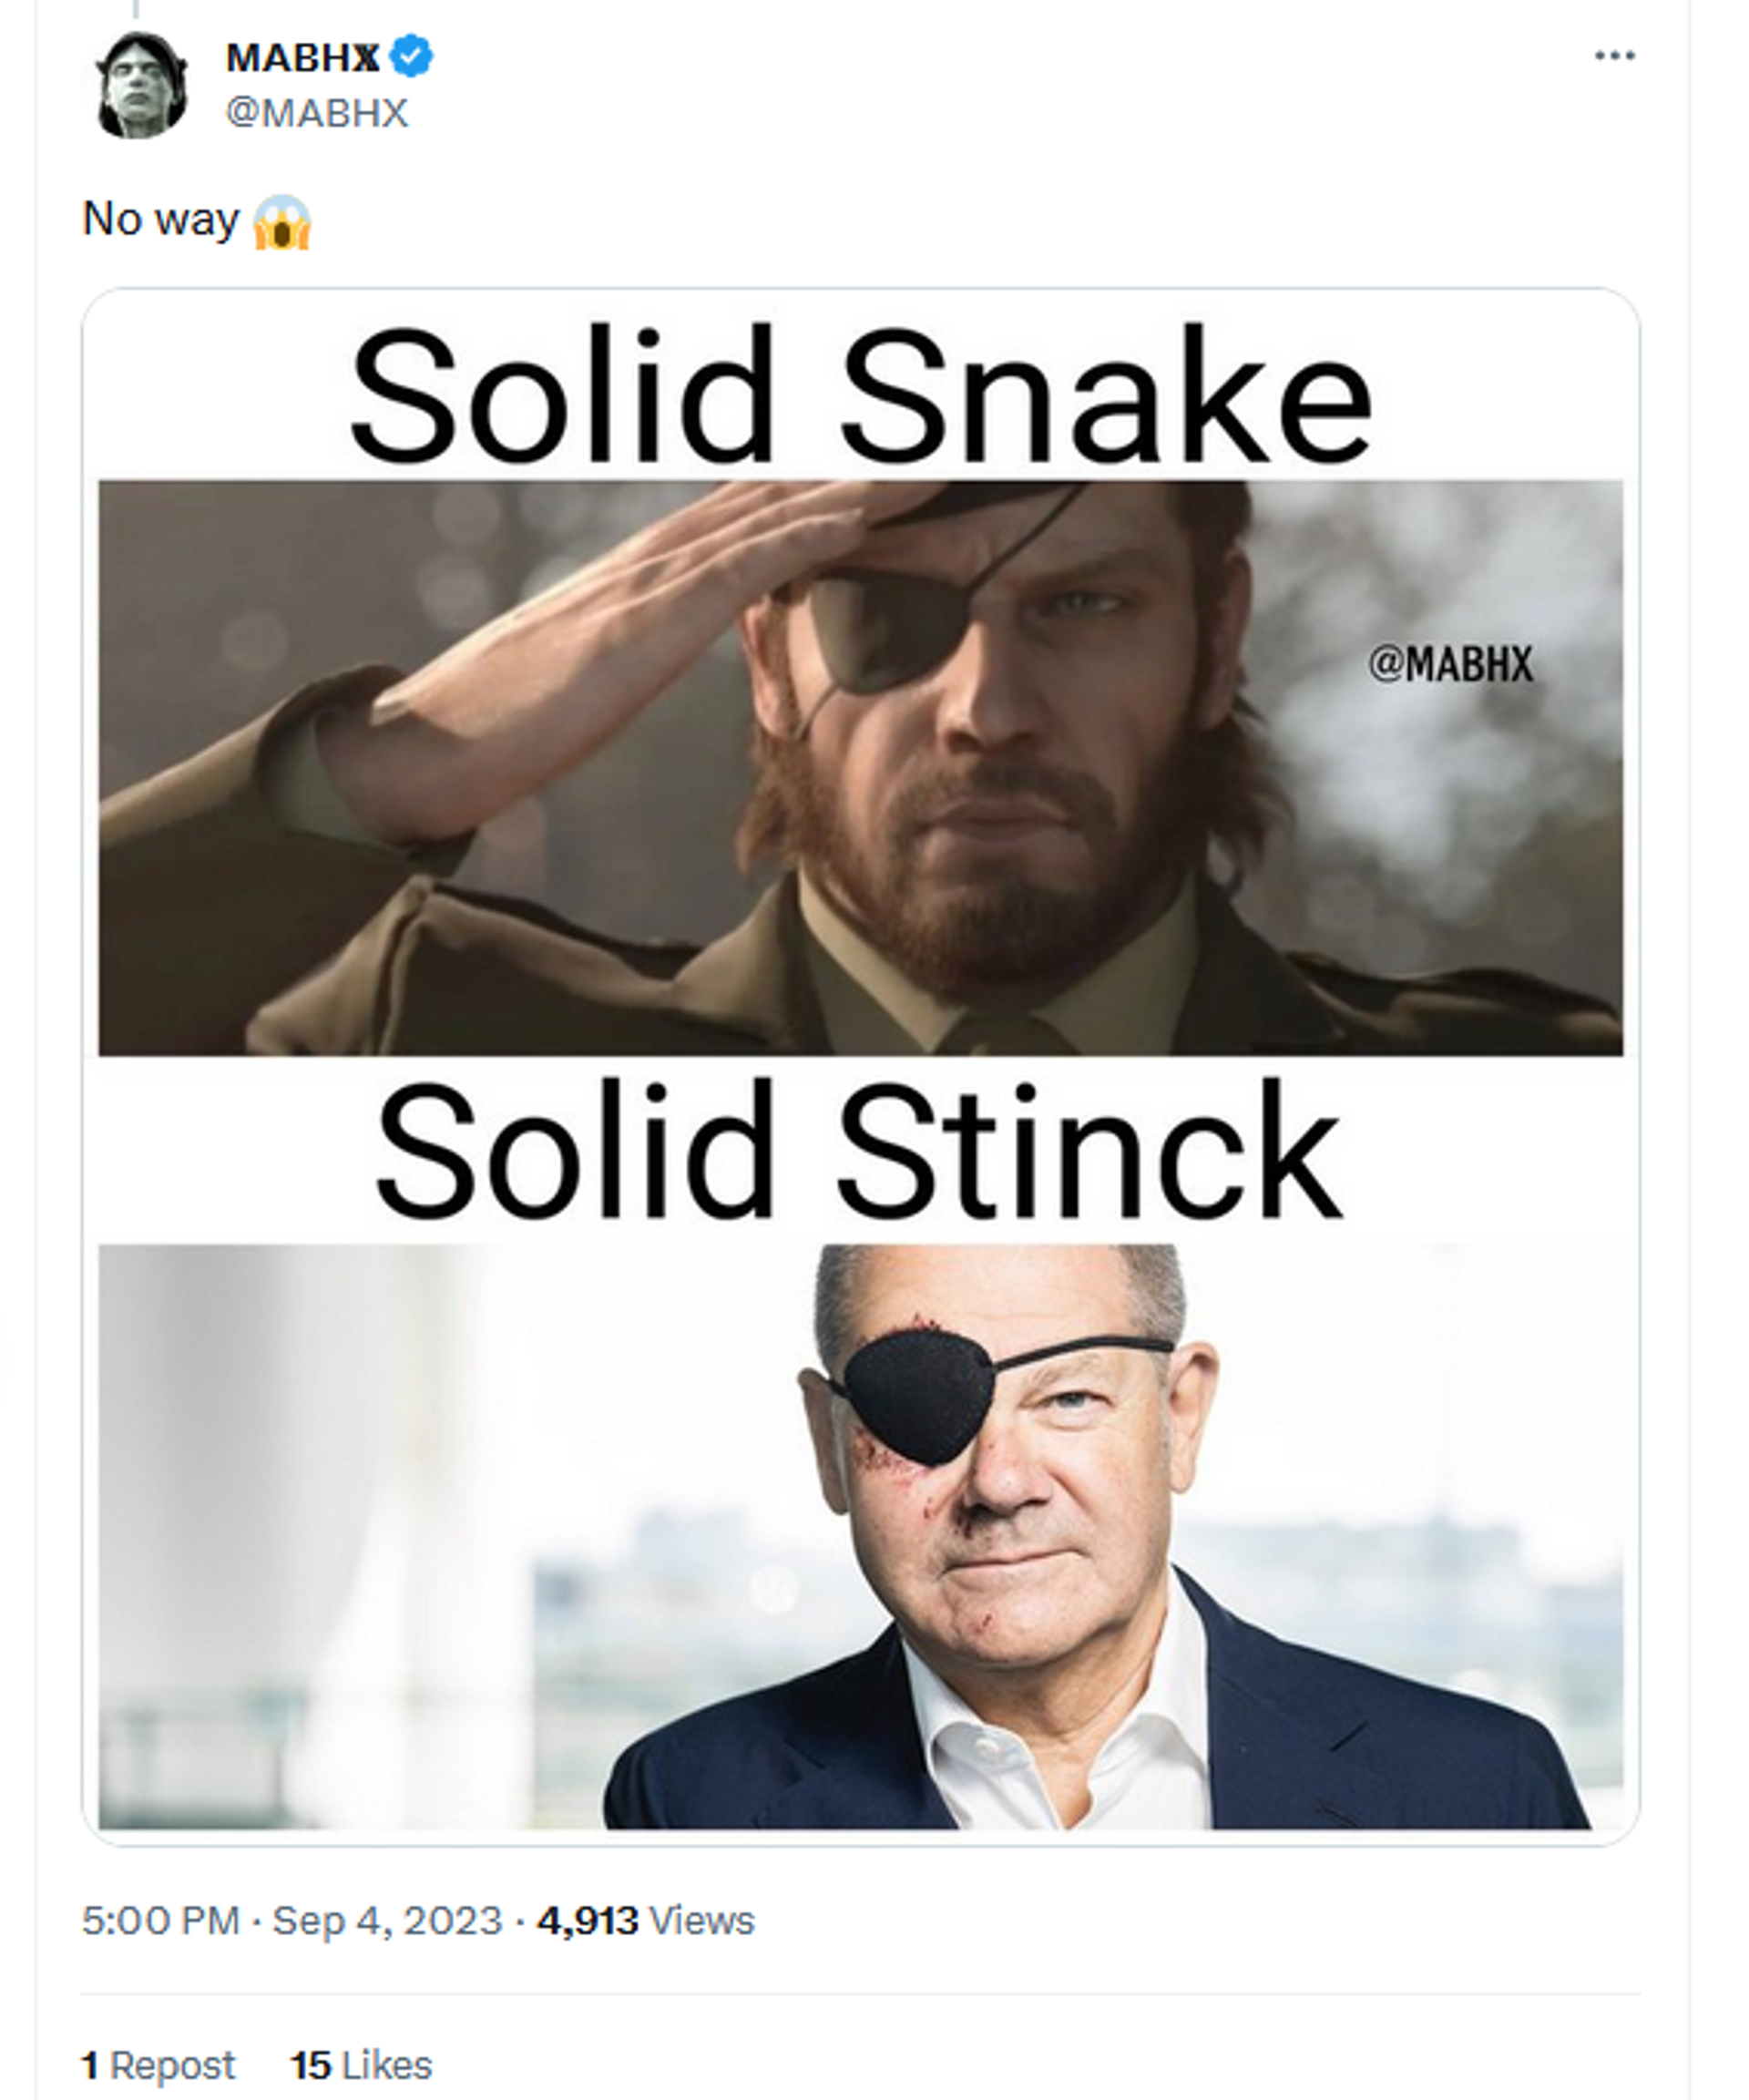 Meme featuring German Chancellor Olaf Scholz and Solid Snake from the Metal Gear Solid series. Stinck means Stuck in German. - Sputnik International, 1920, 04.09.2023